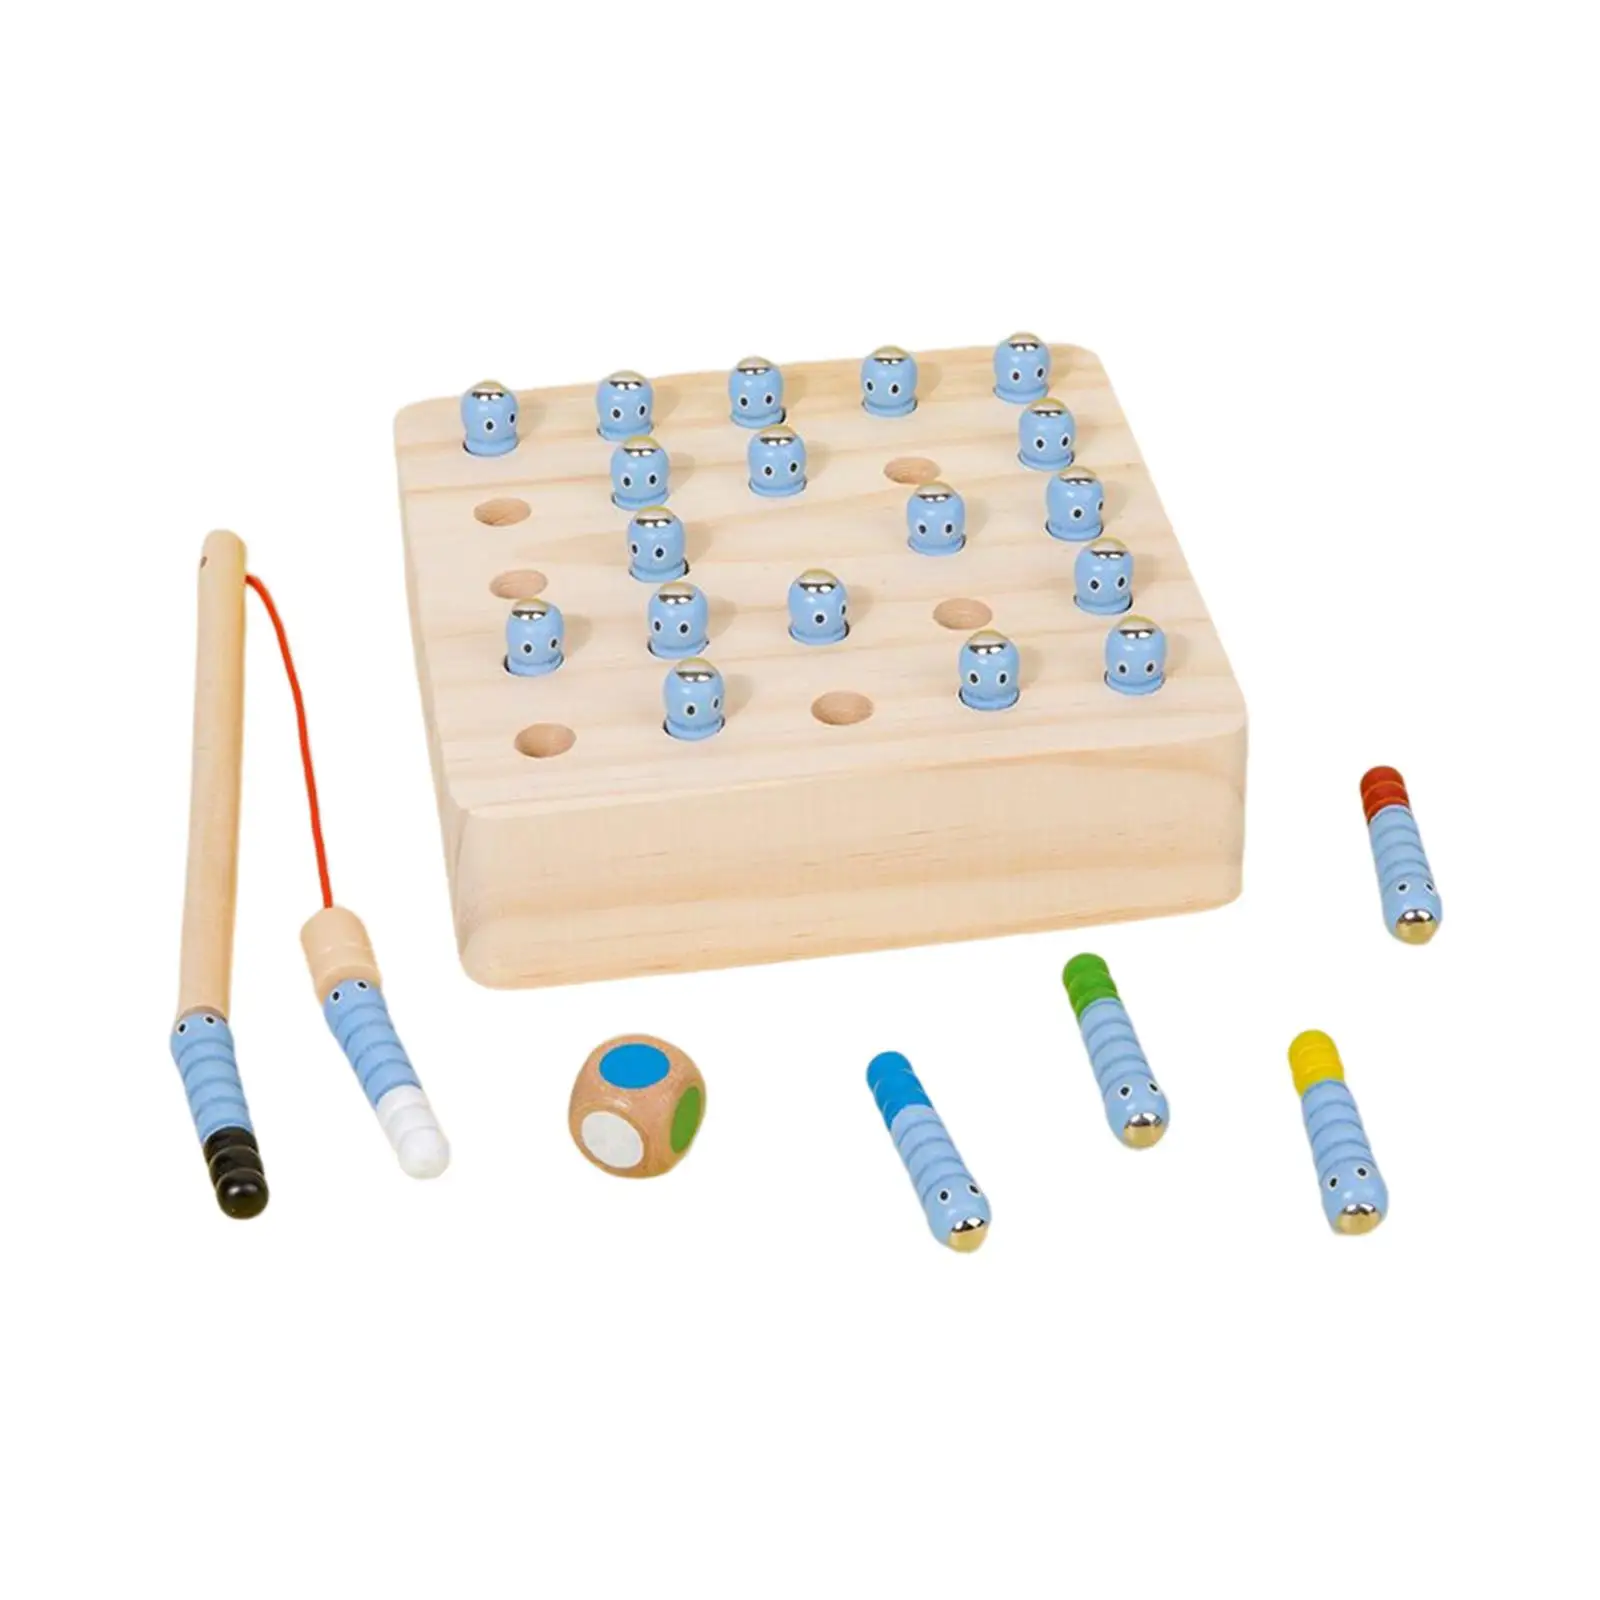 Wooden Fishing Game Toy Memory Training Educational Toys for Children Kids